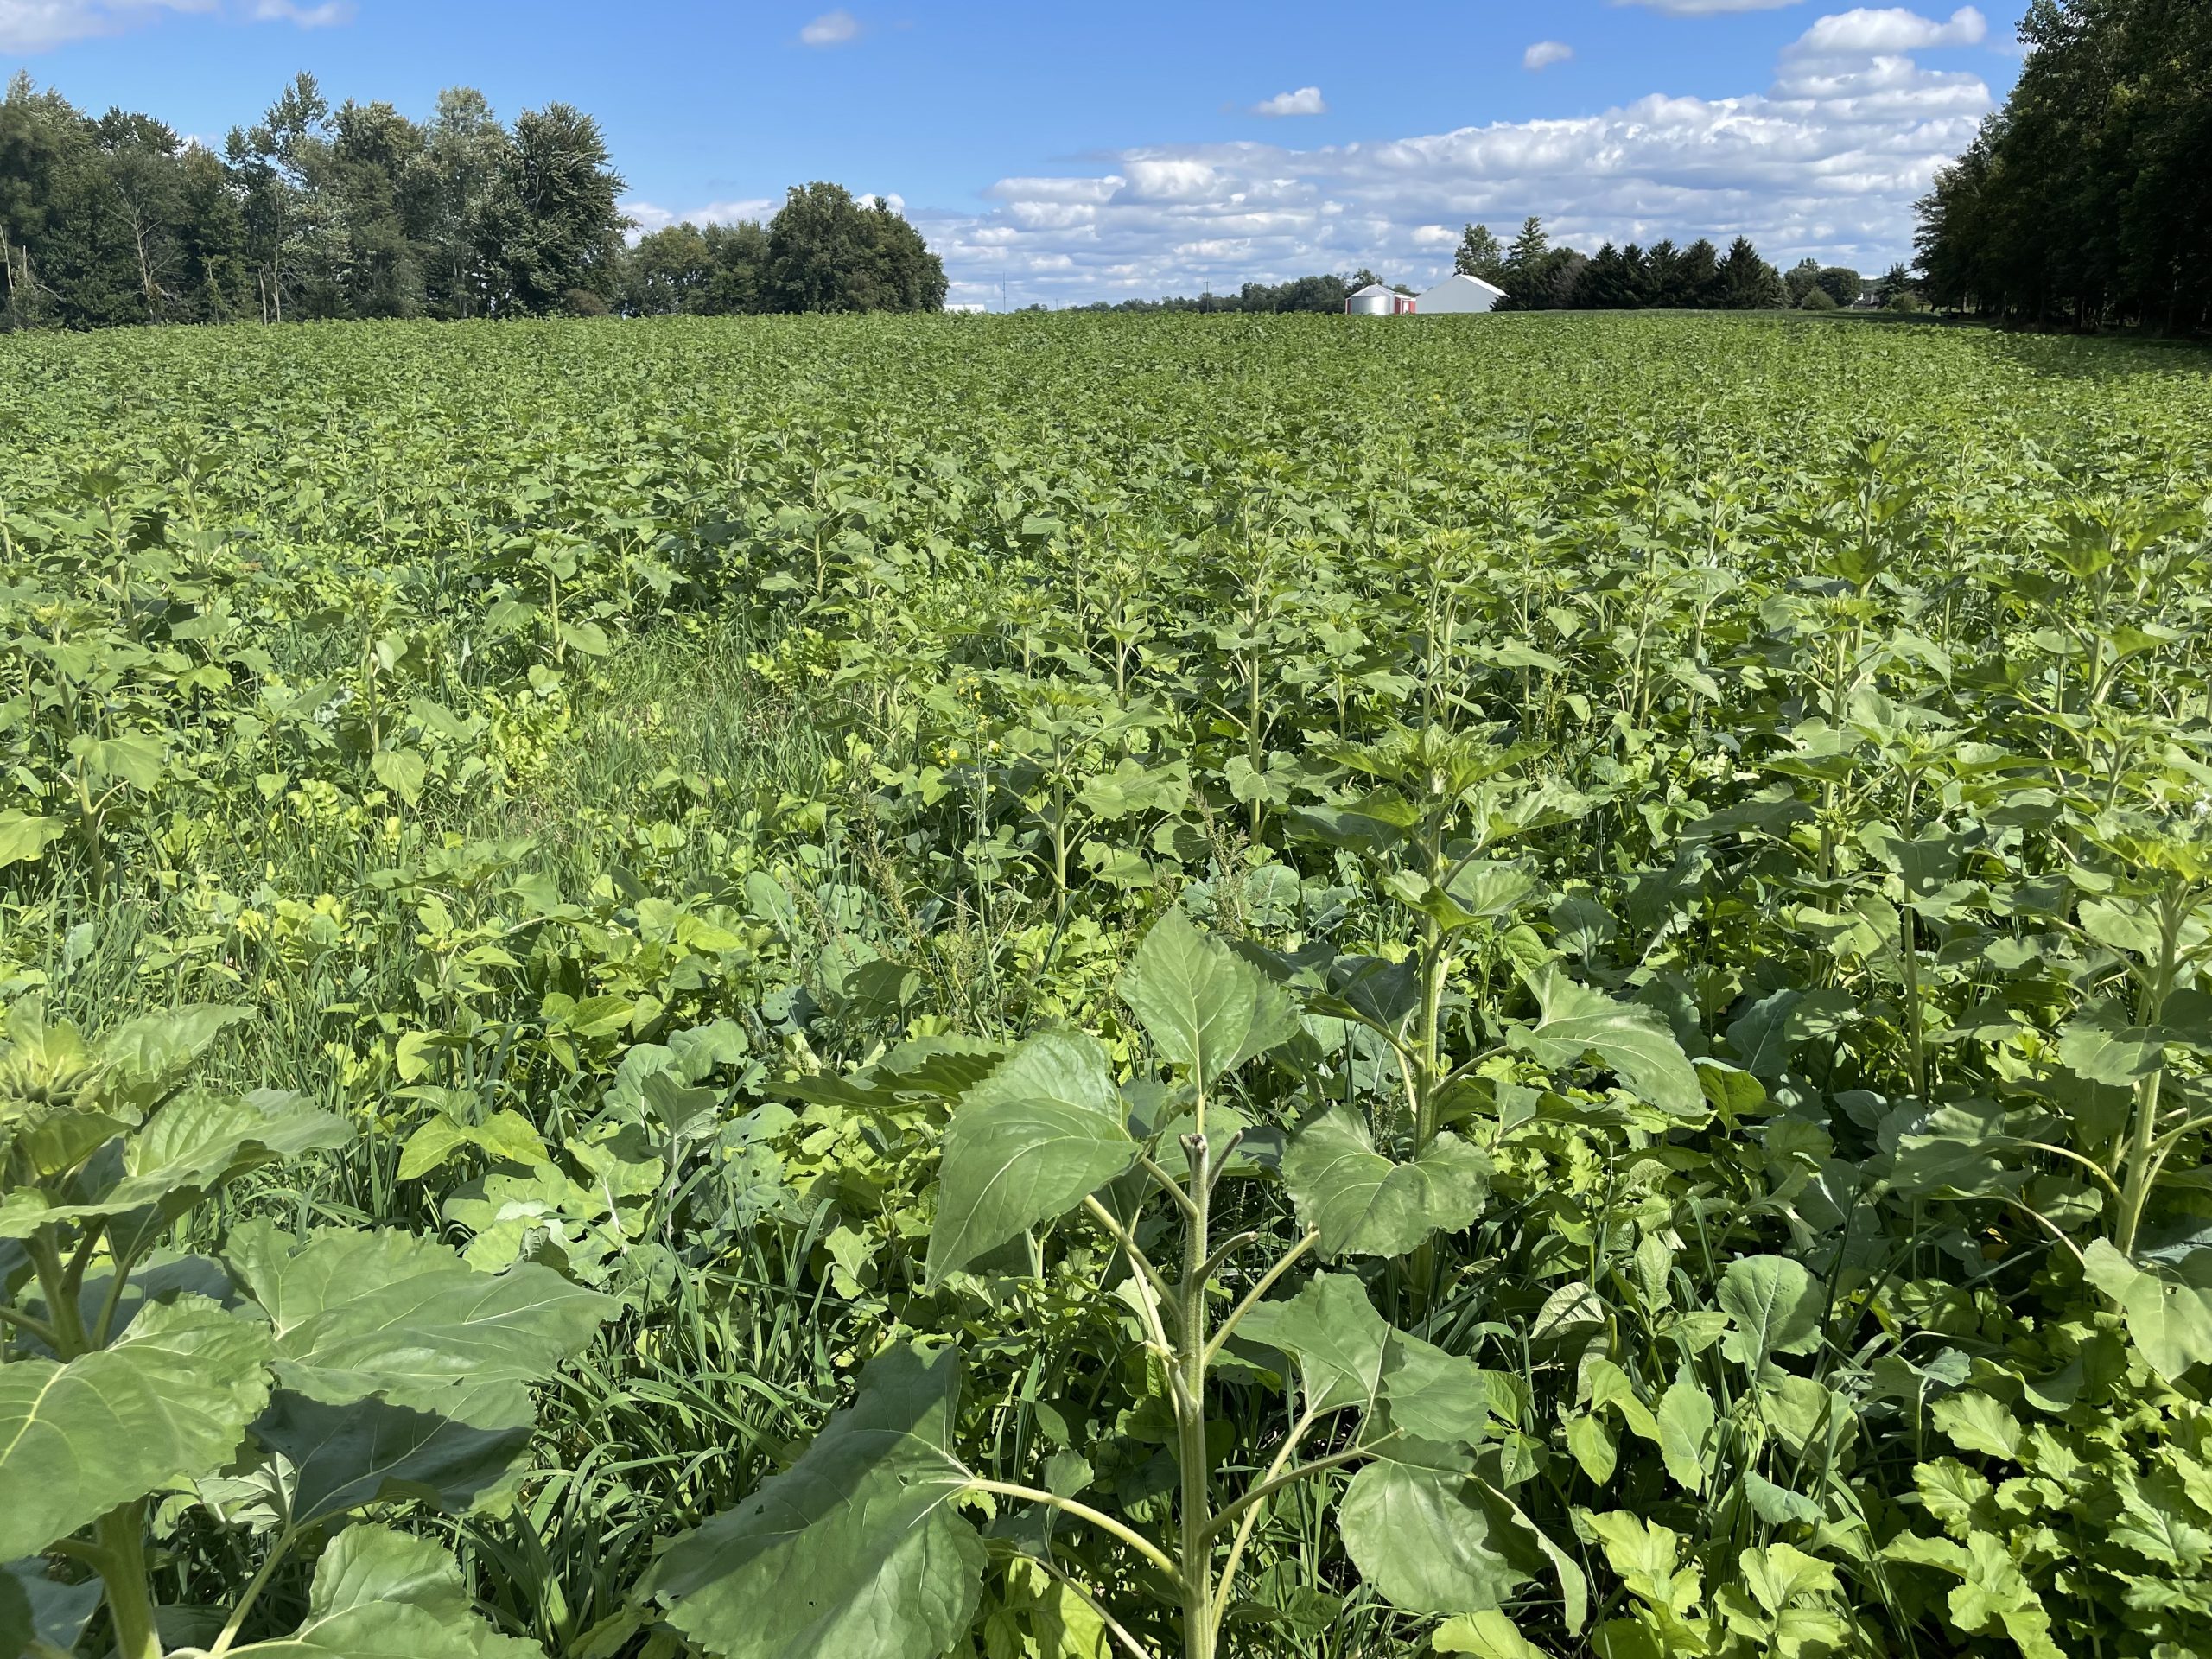 Why cover crops after wheat?